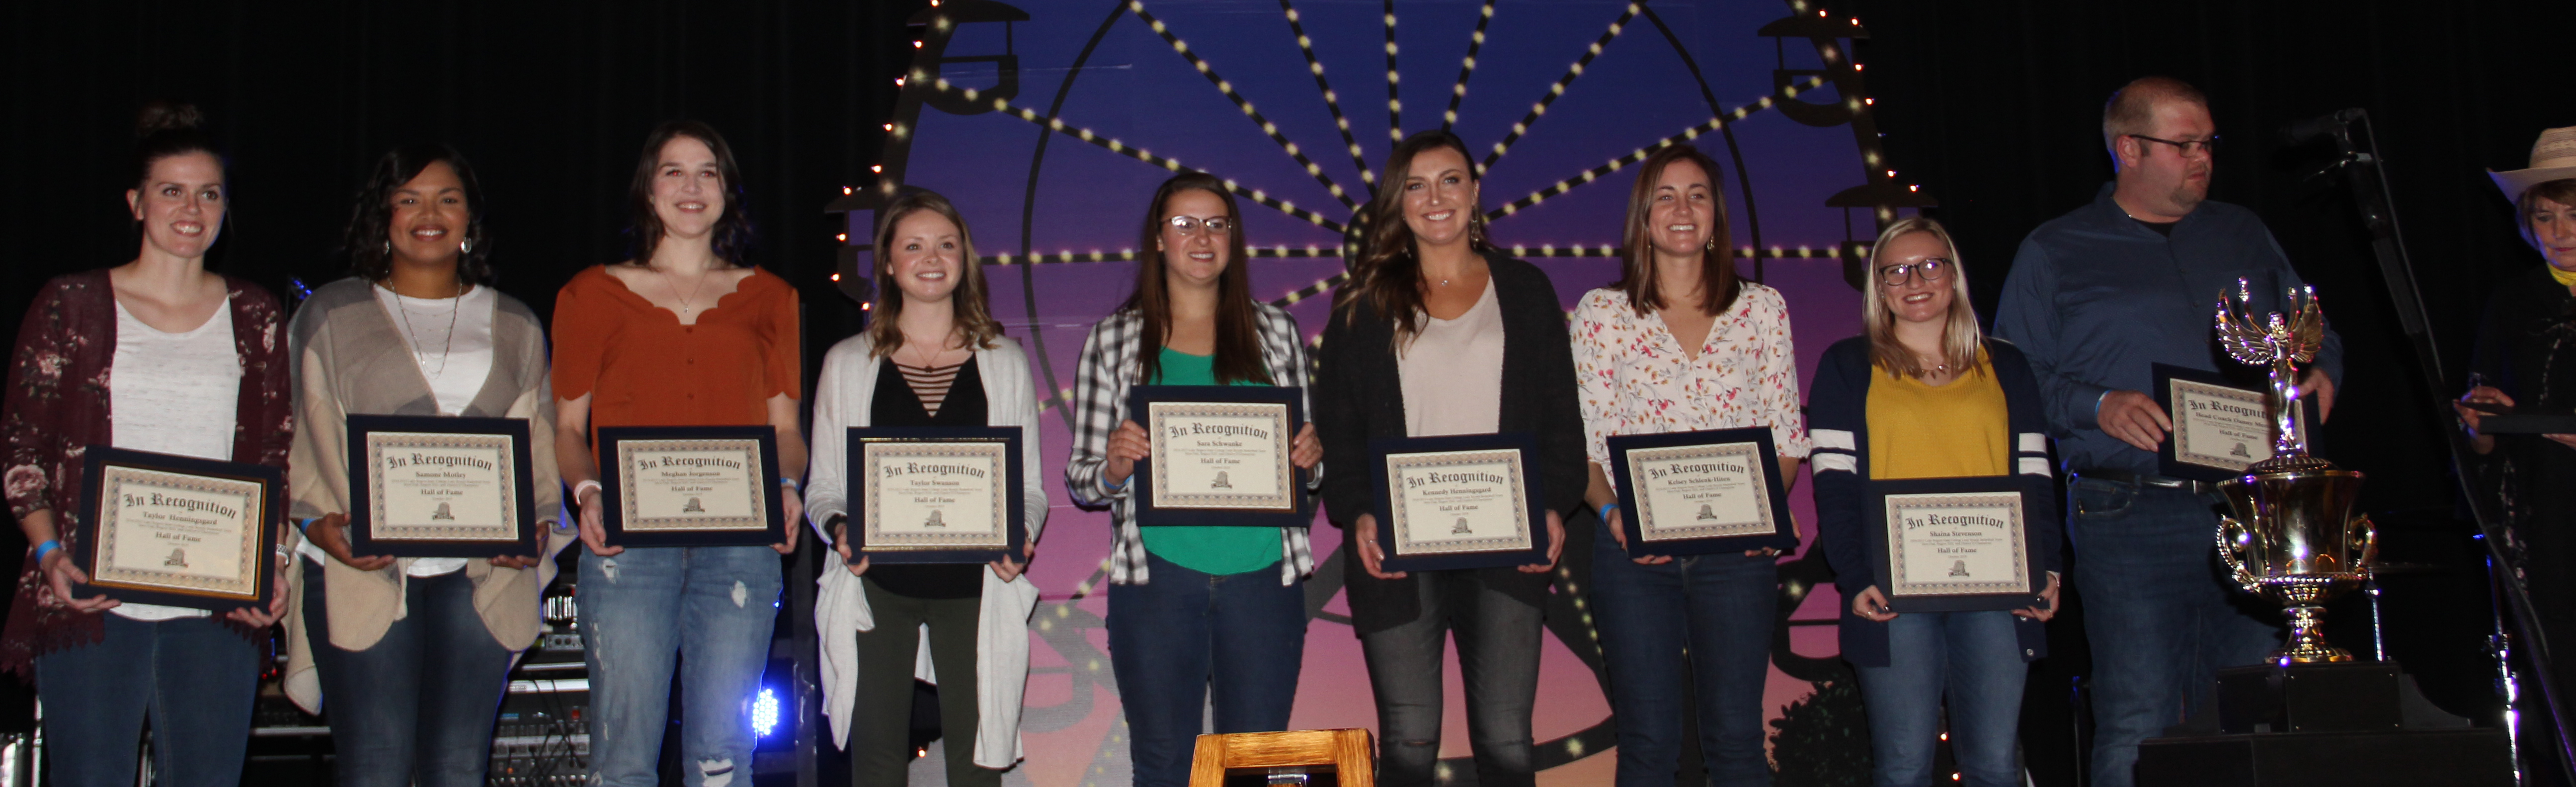 Lady Royals team inducted into Hall of Fame